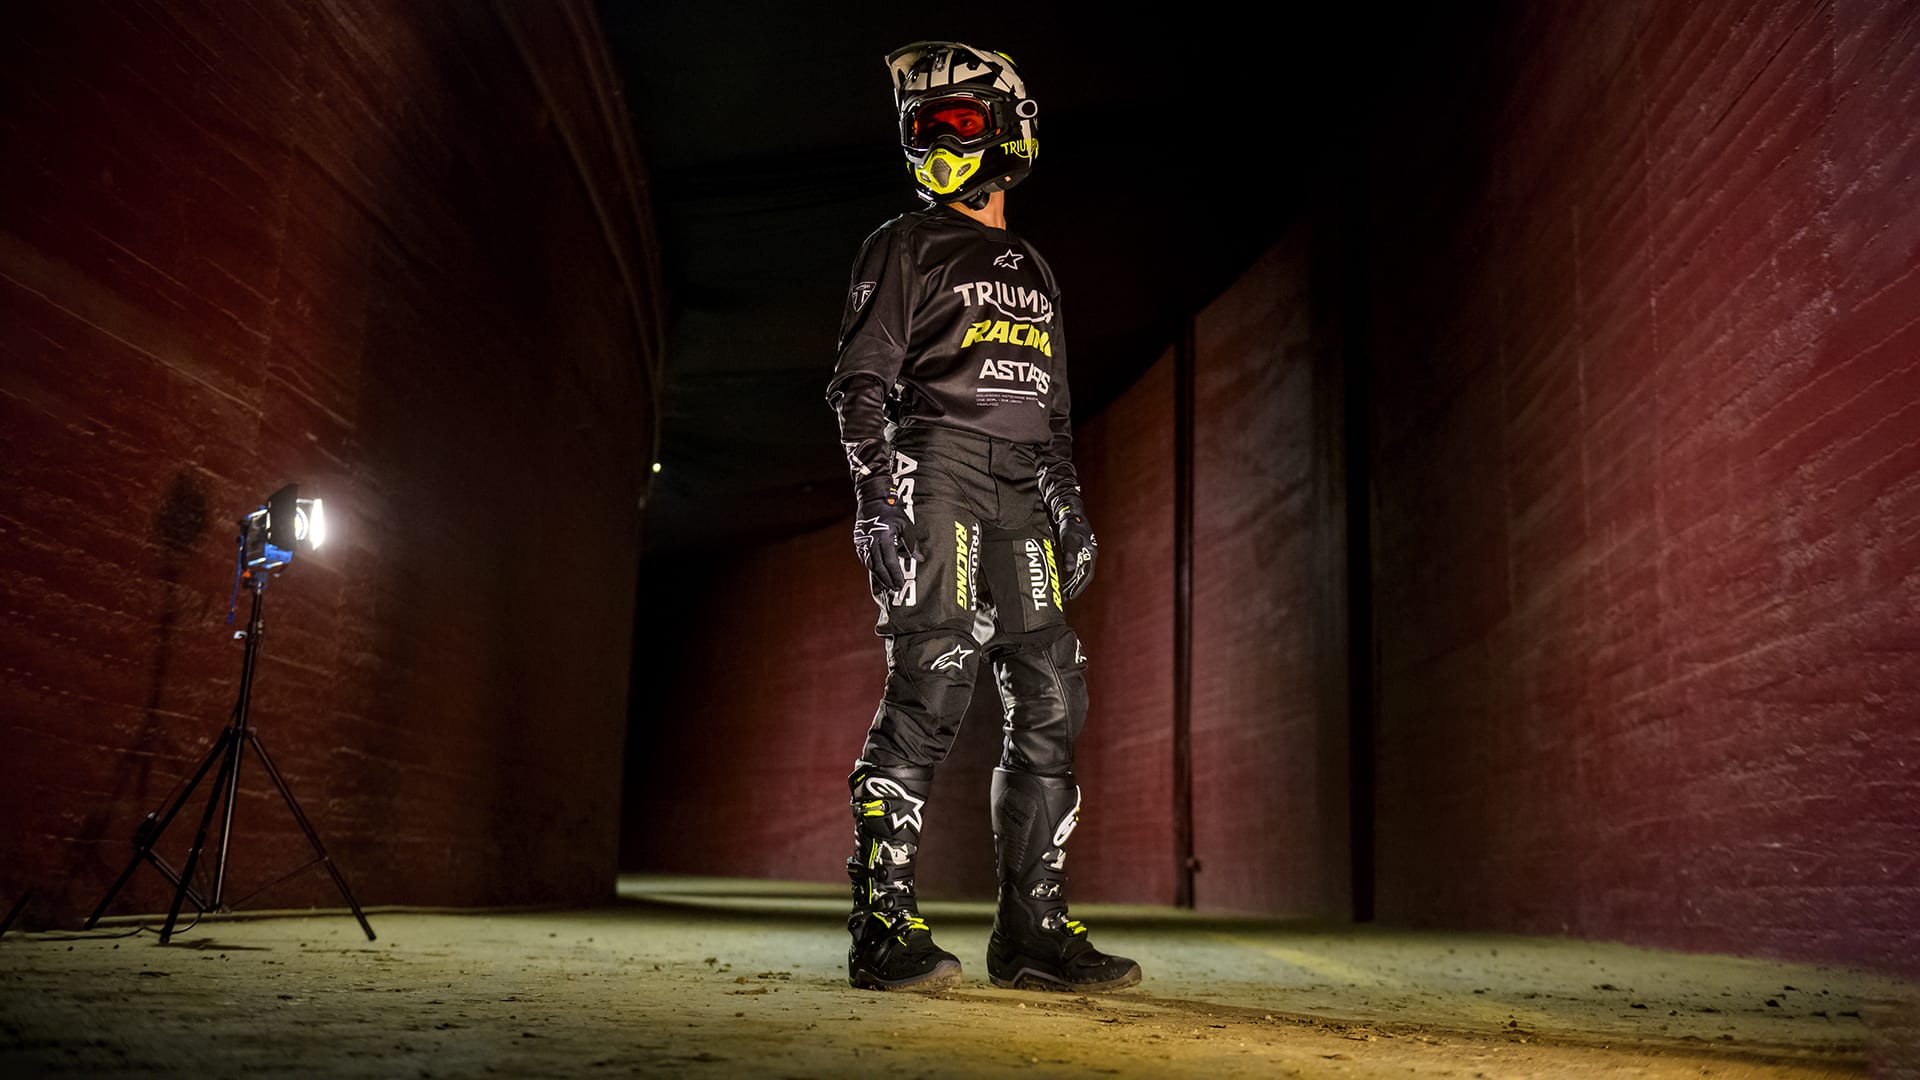 Triumph TF250 X racer motocross clothing in-use